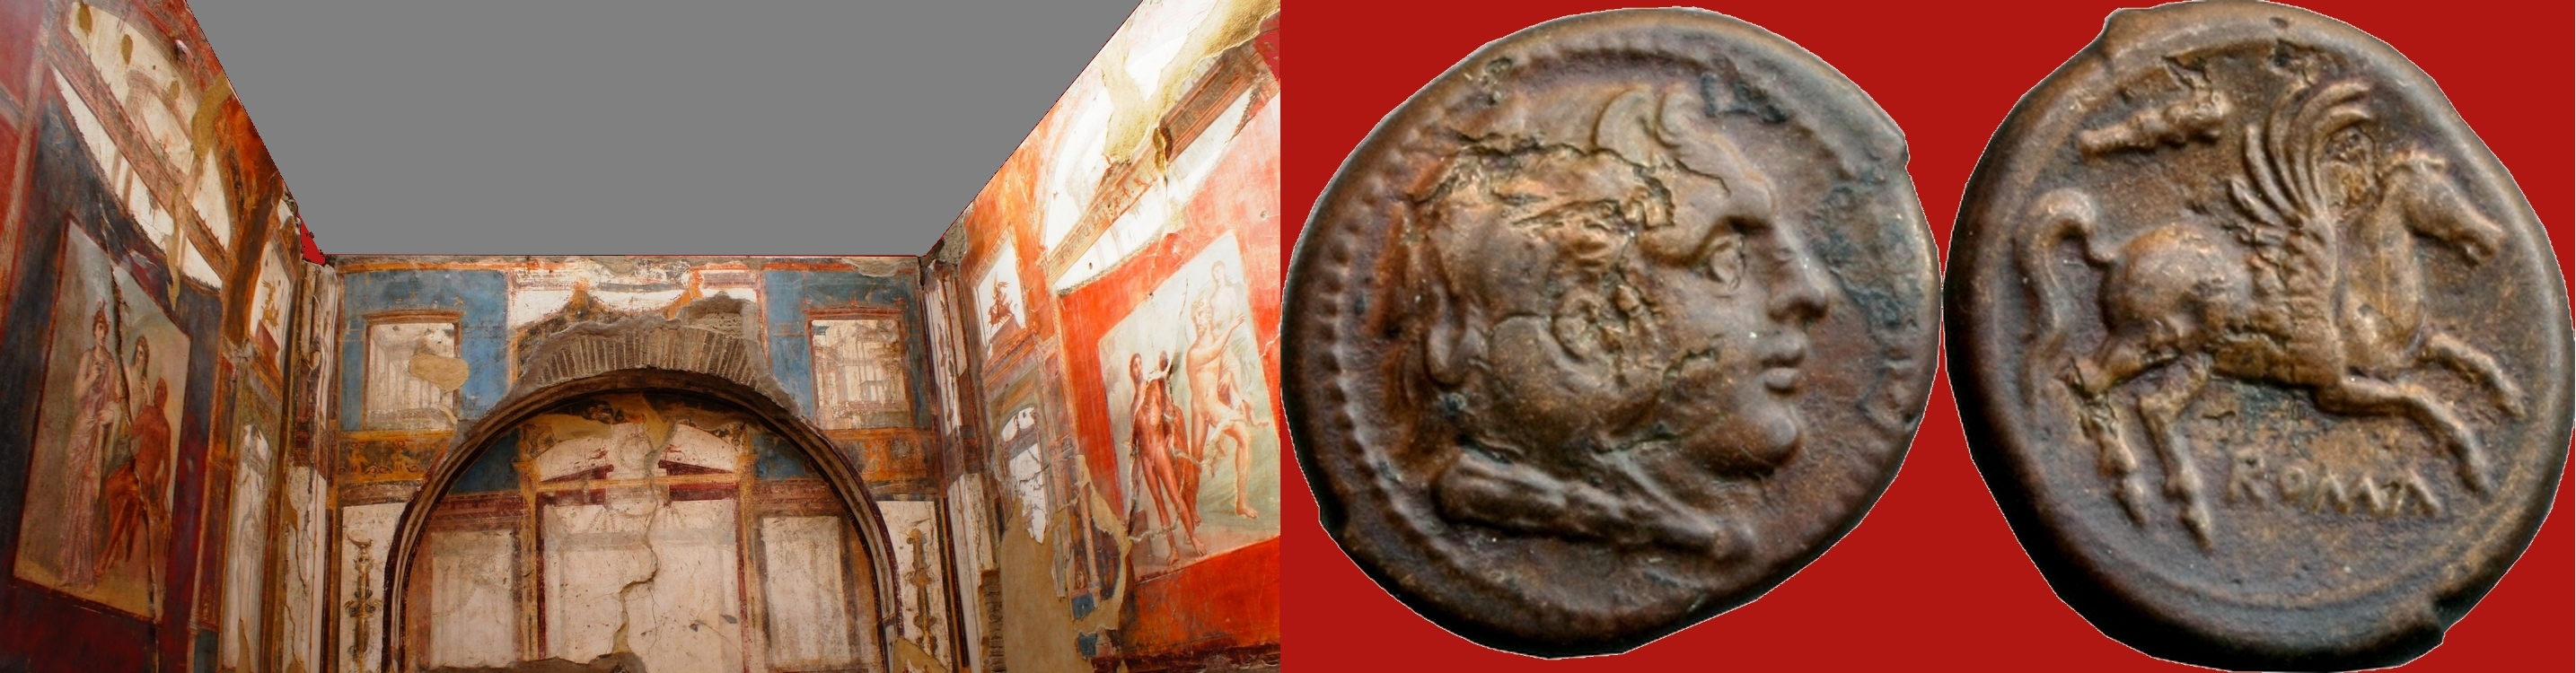 27/3 coin of the Roman Republic 230BC with Hercules, Pegasus and Herculean club, and College of Augustales Herculaneum with frescos of myths of Hercules